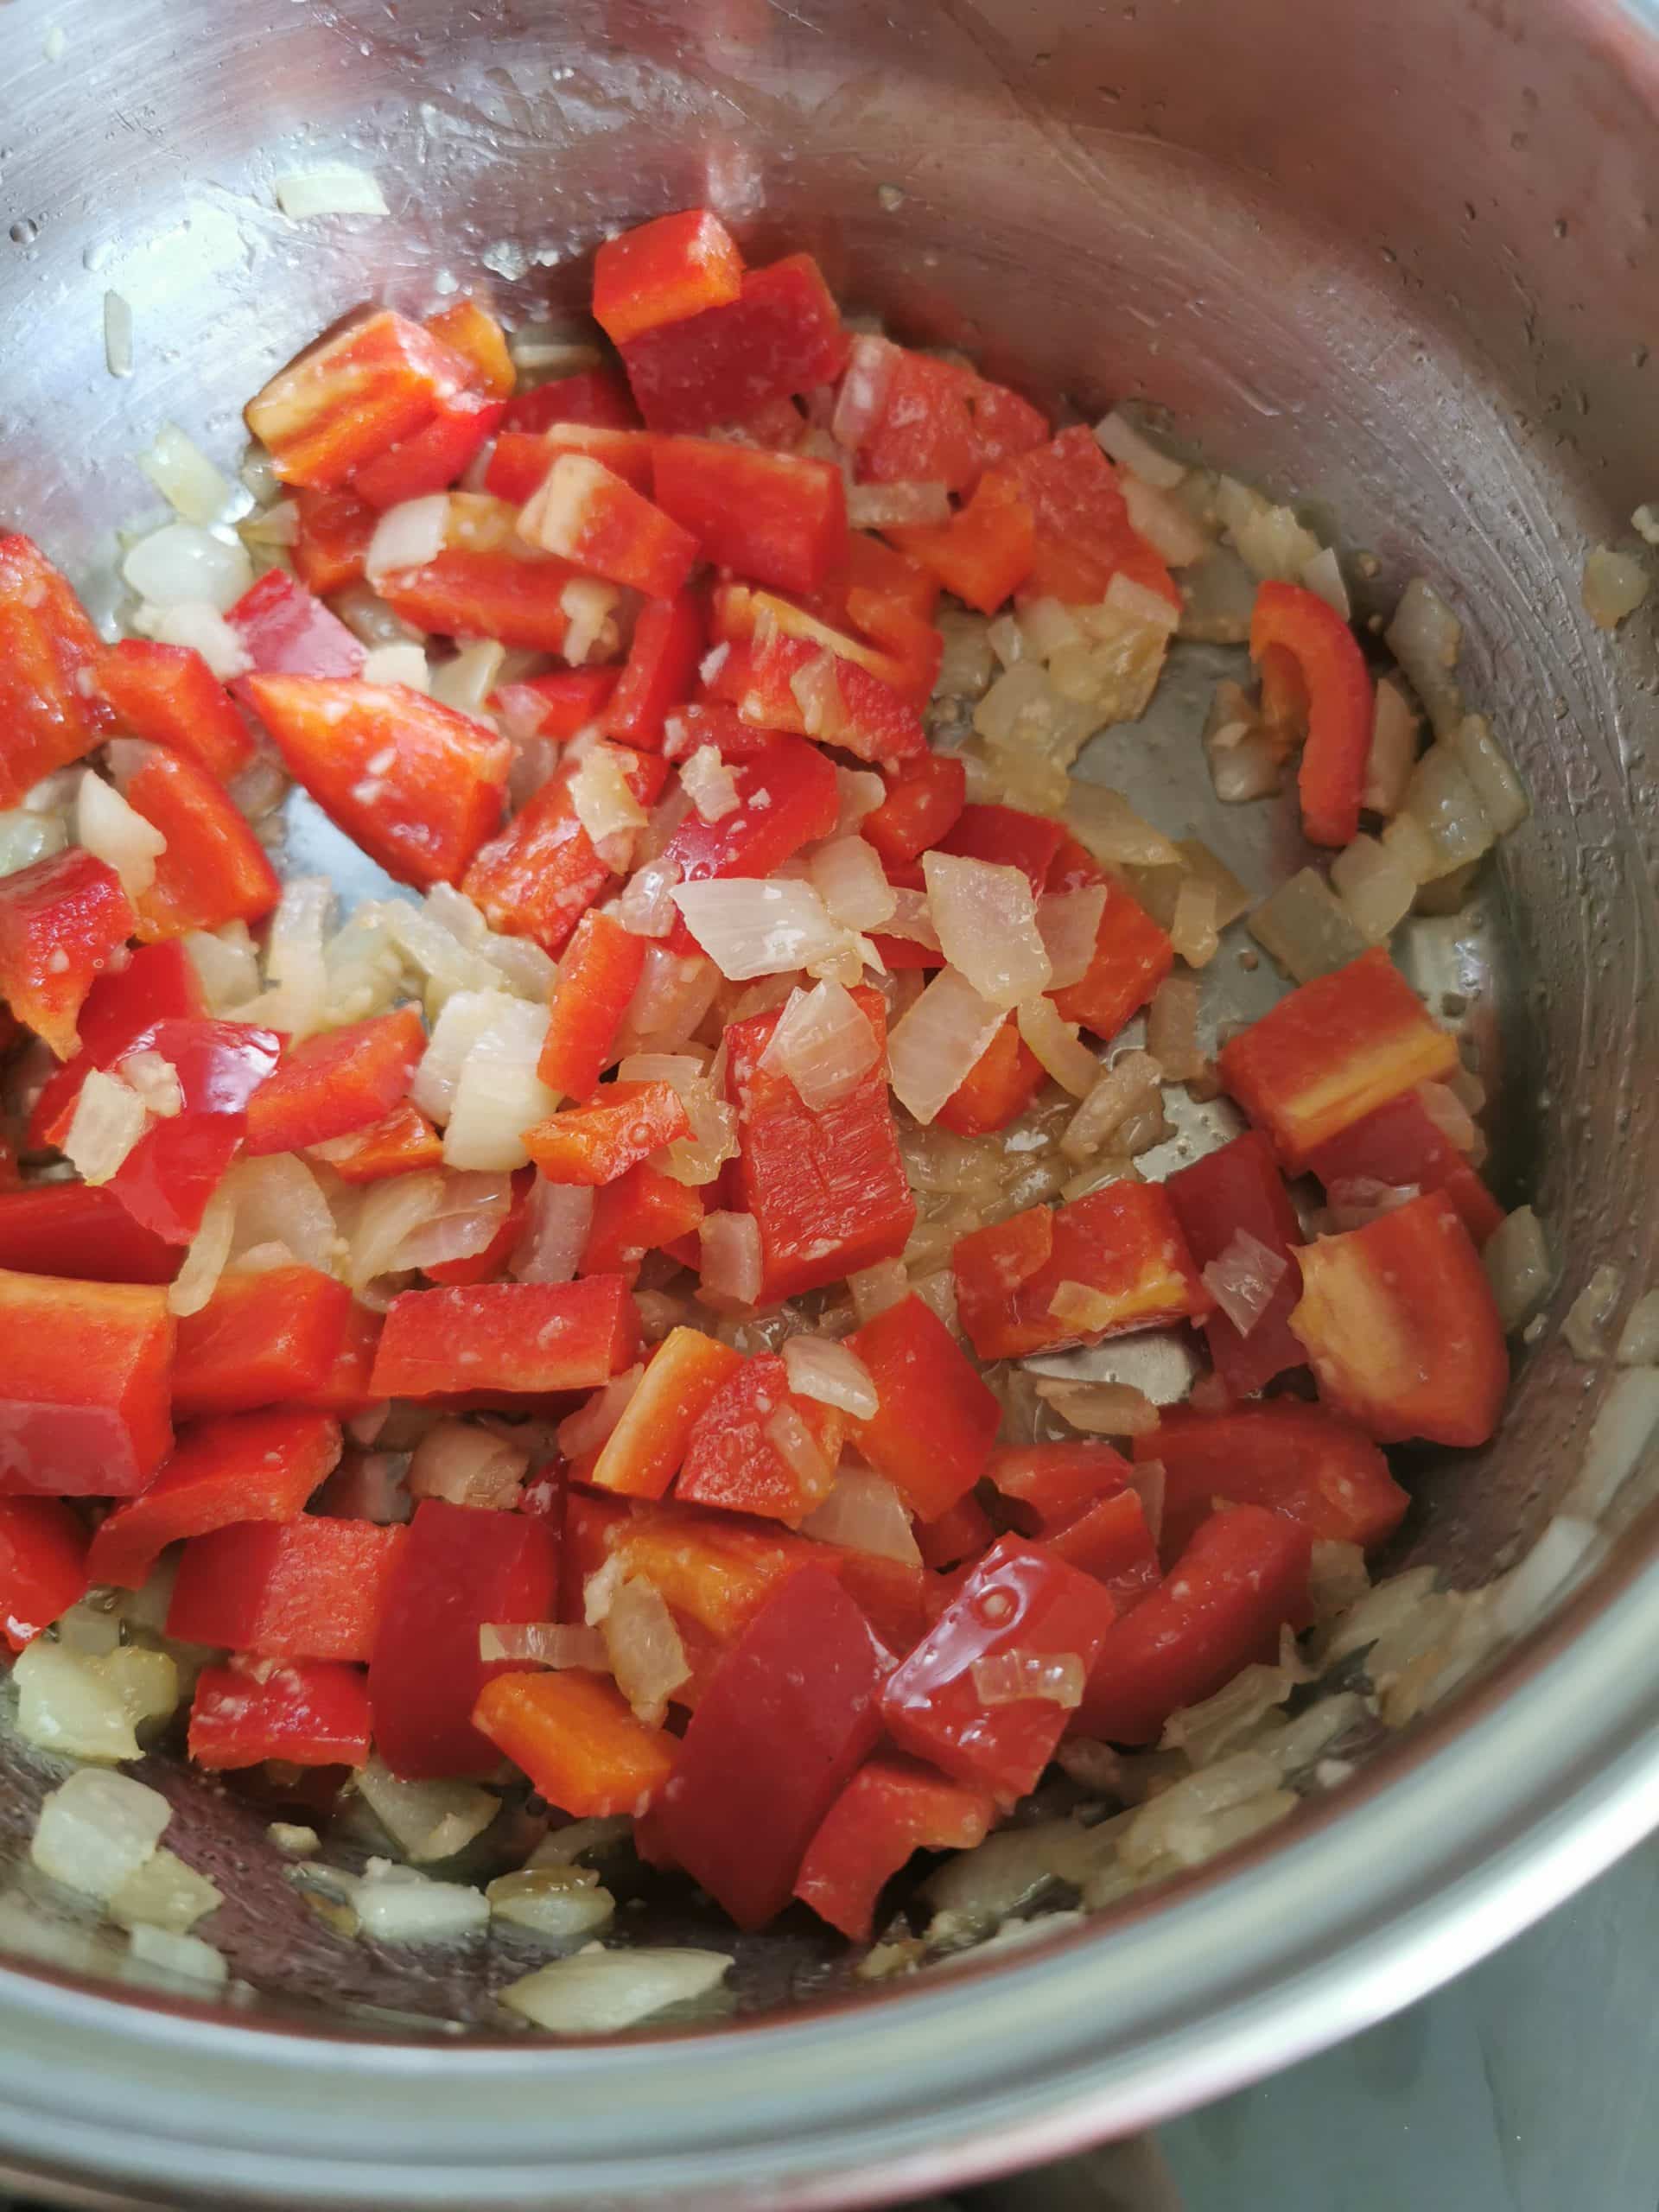 Diced onion, garlic and red peppers in a saucepan